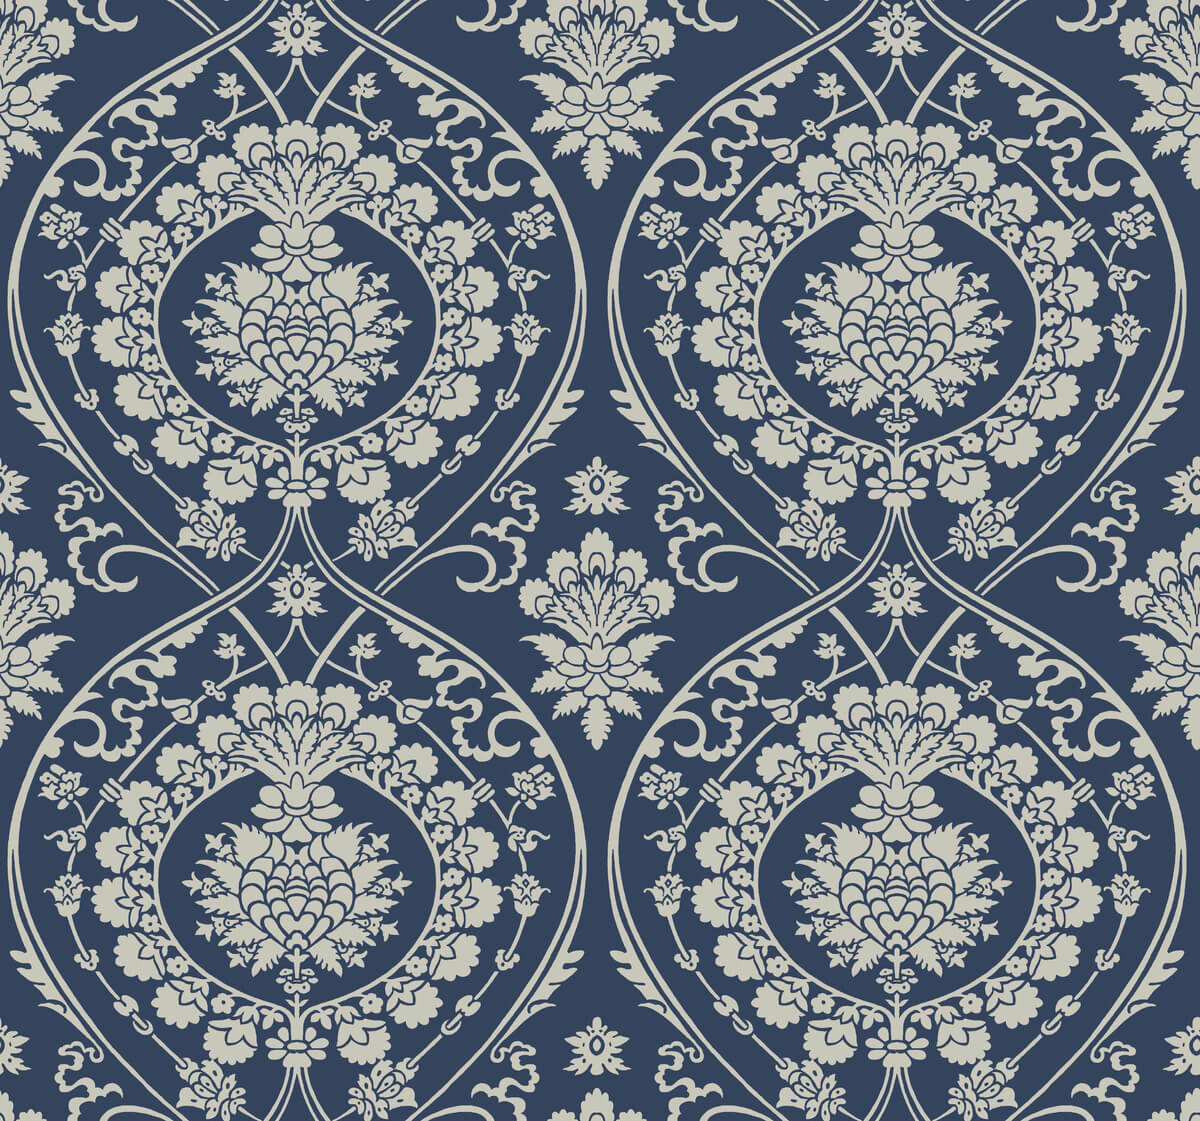 Damask Resource Library Imperial Damask Wallpaper - Navy & Silver